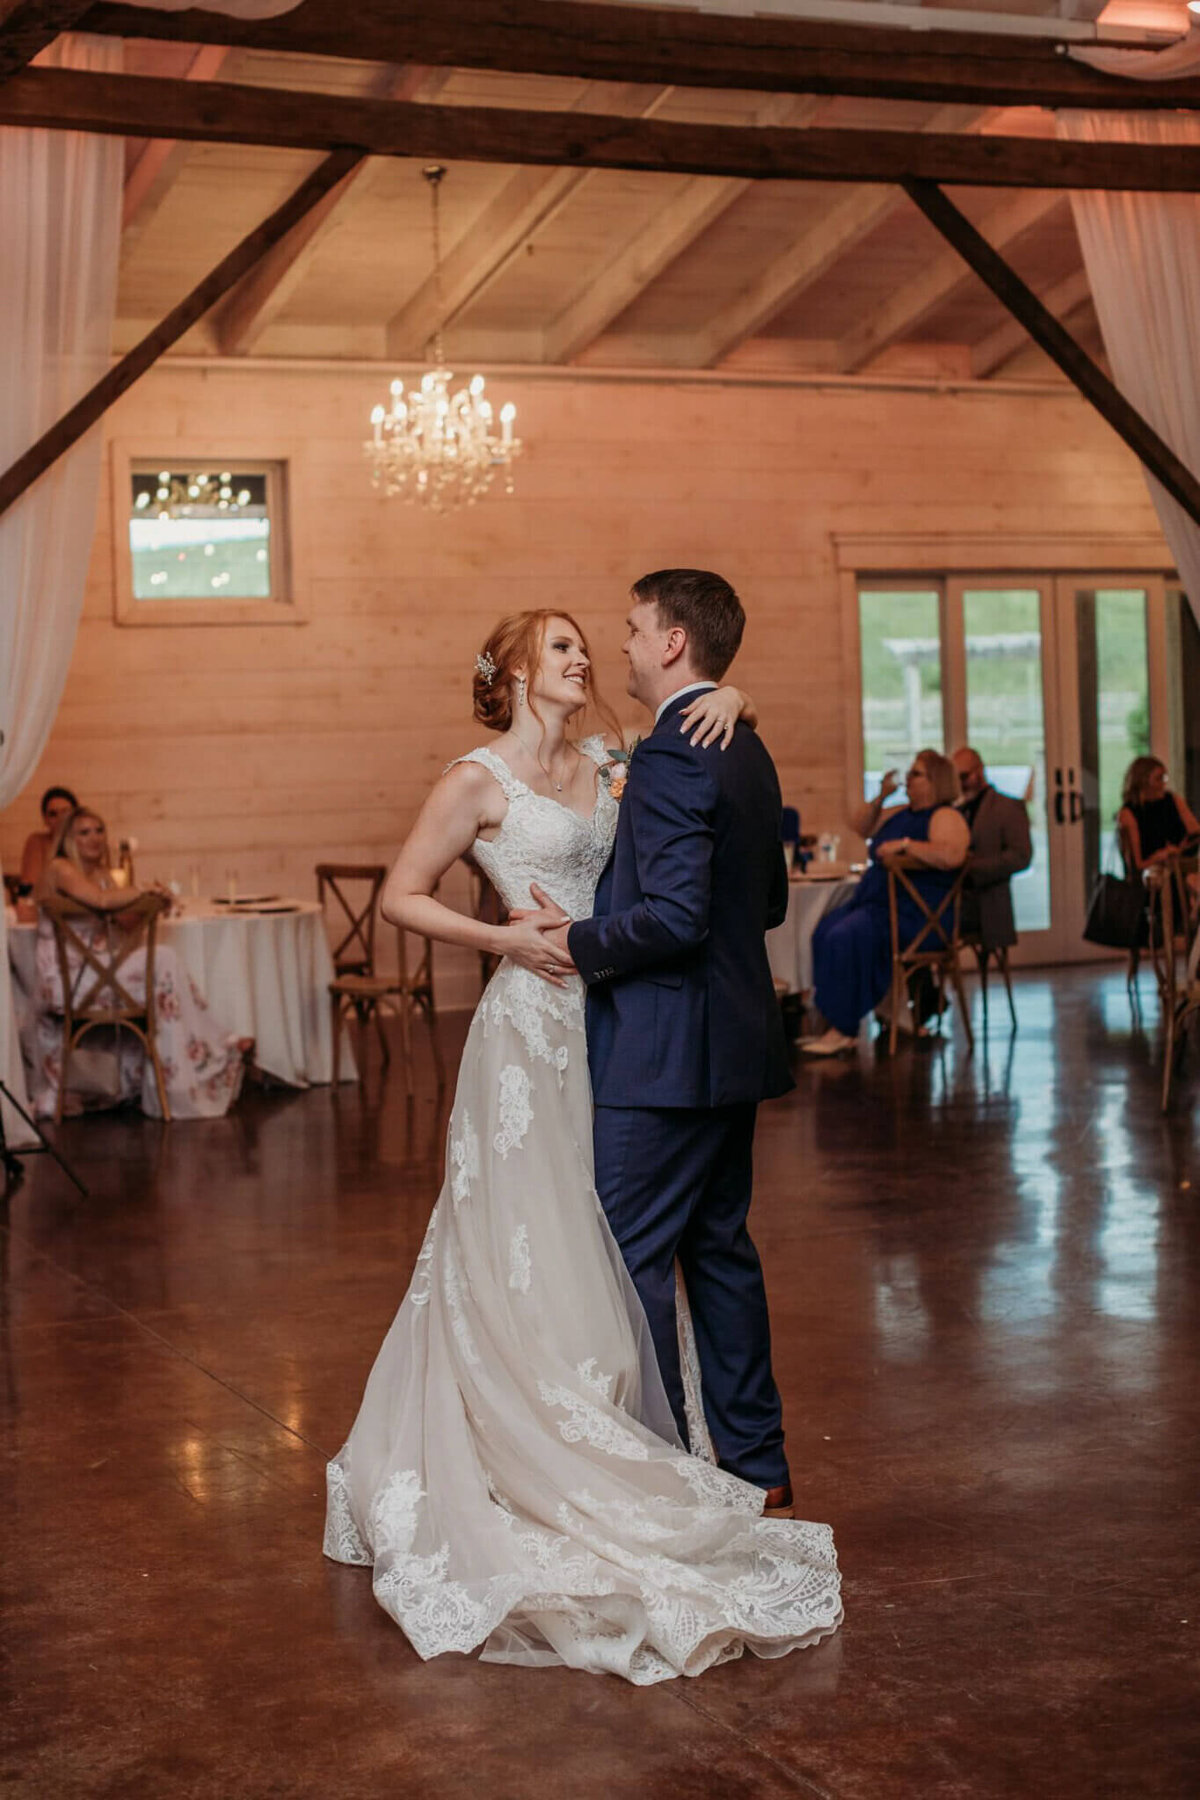 Photo of a bride and groom slow dancing inside of a white washed barn with chandeliers